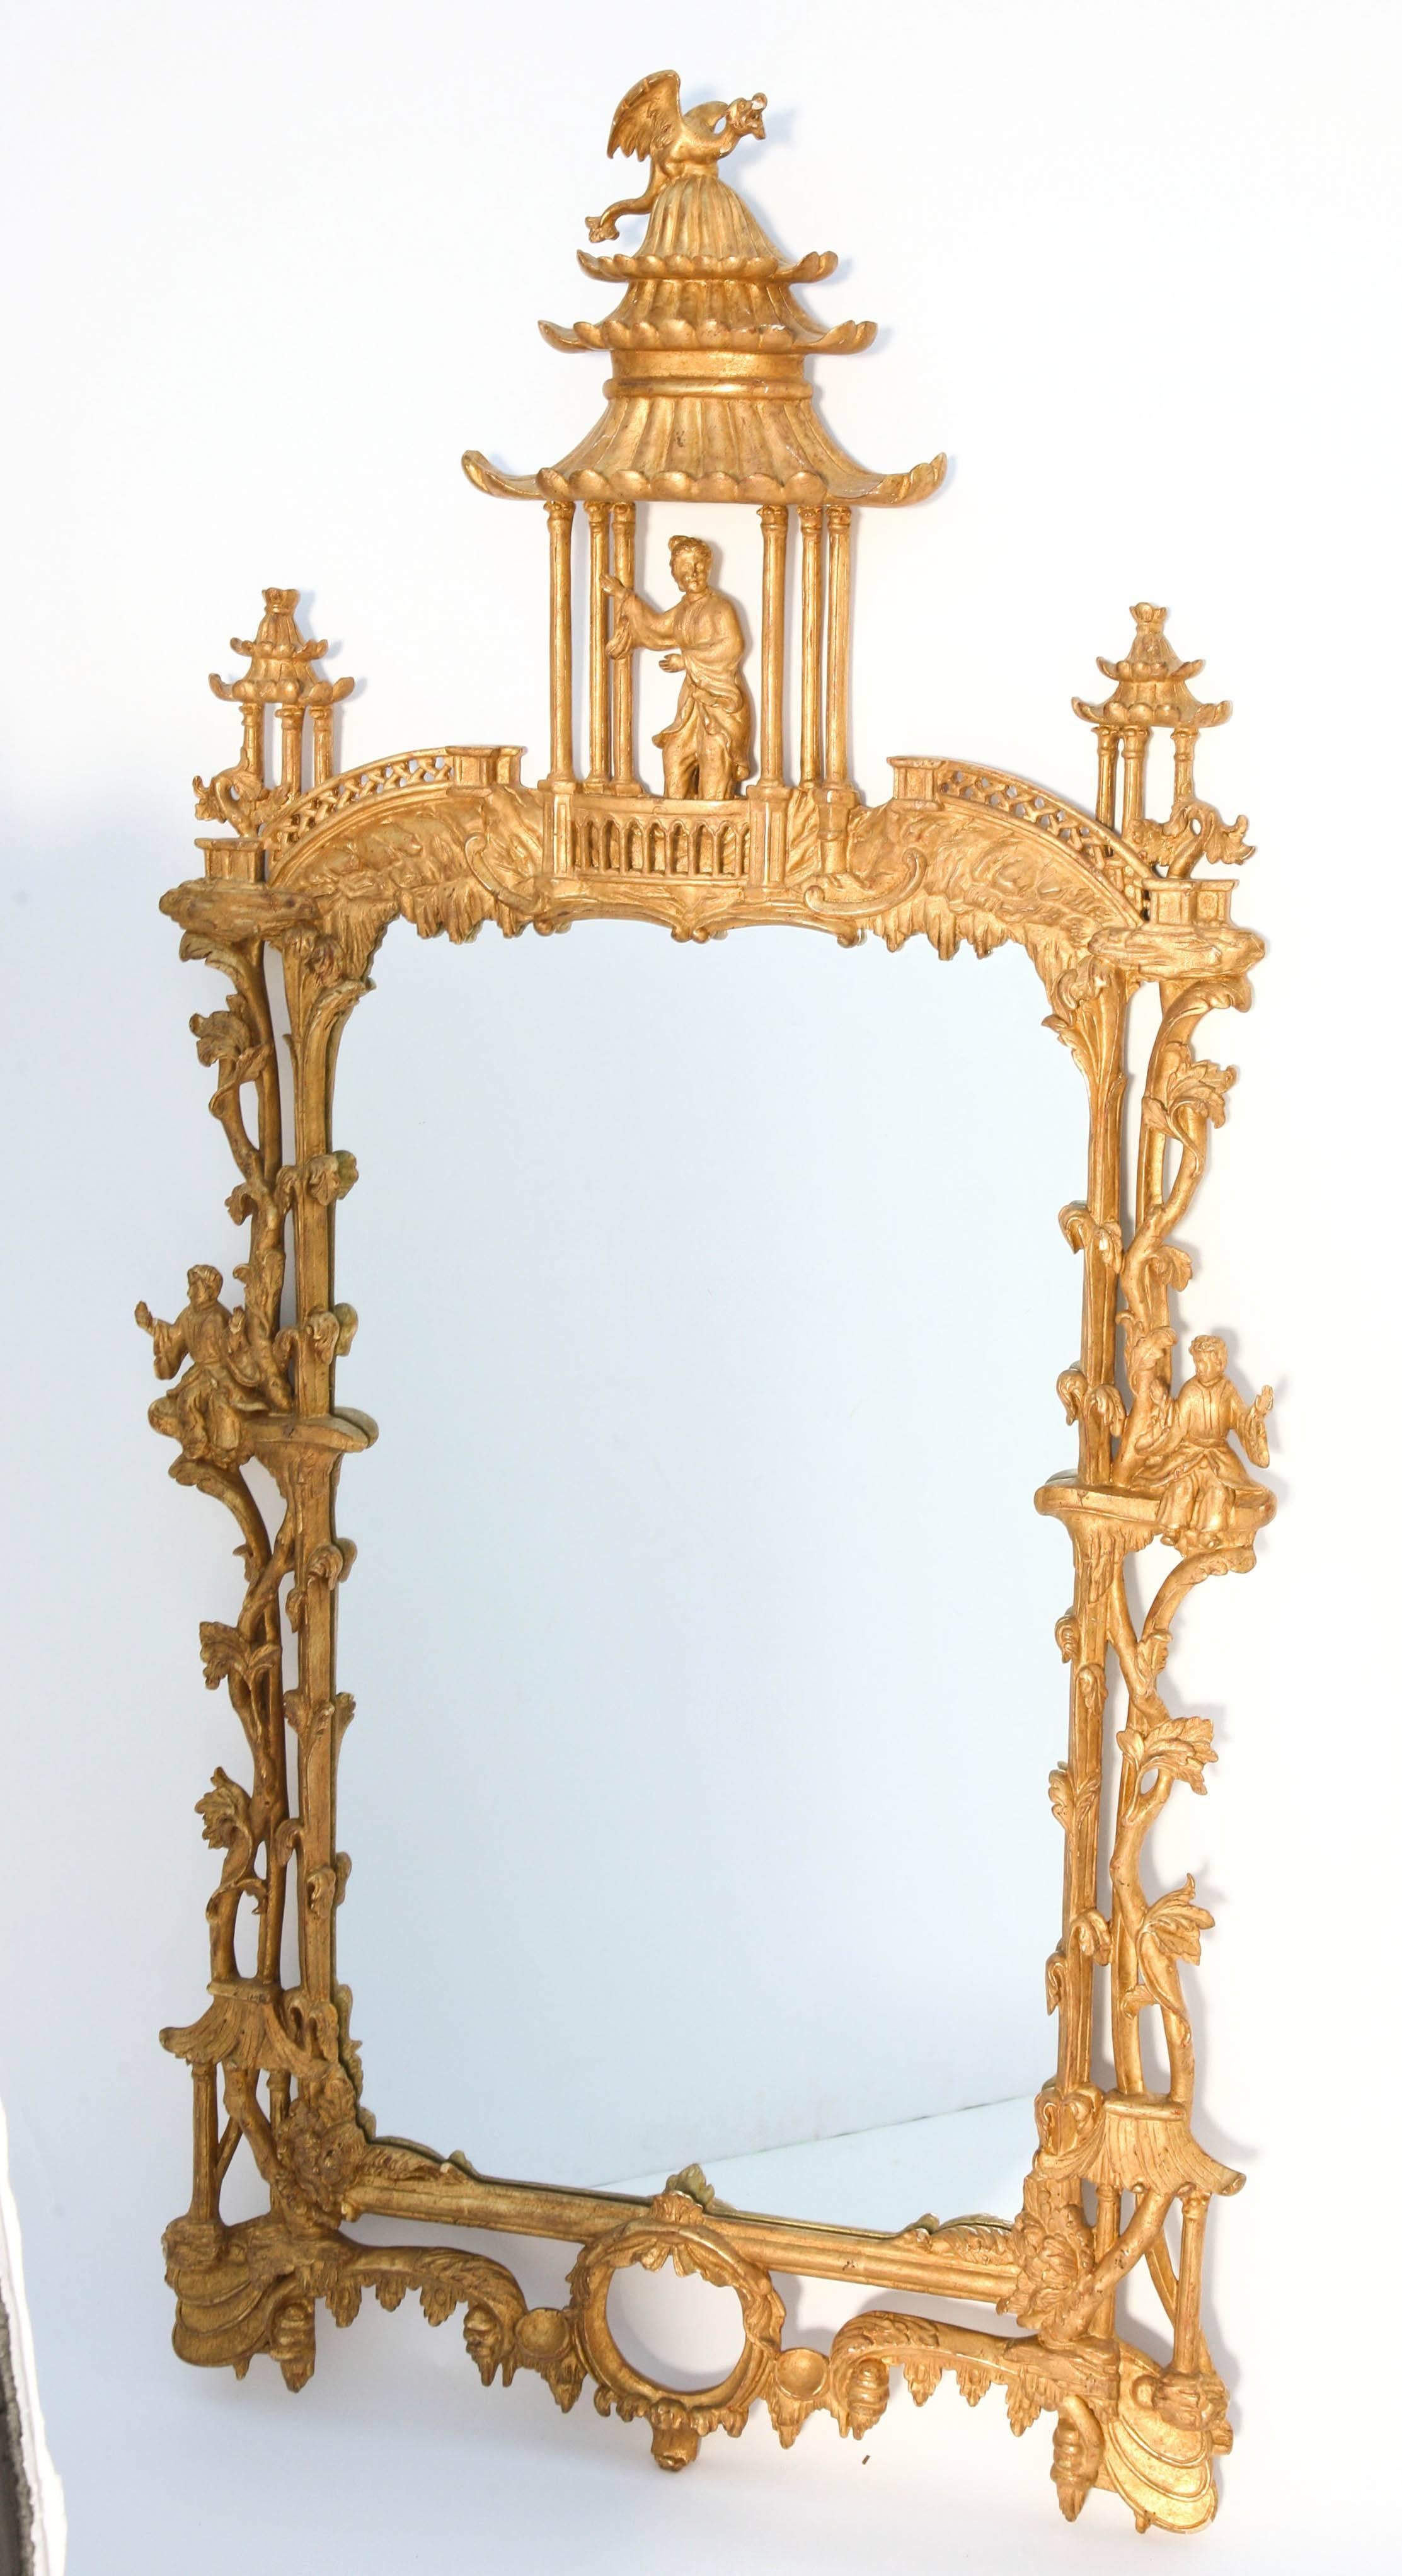 Opposing pair of mirrors, of carved giltwood in the George III style, its mirror set within a shaped frame incorporating symmetrical leafy vines, each sides hung with figural carving, surmounted by an pierced pediment, elaborately carved with